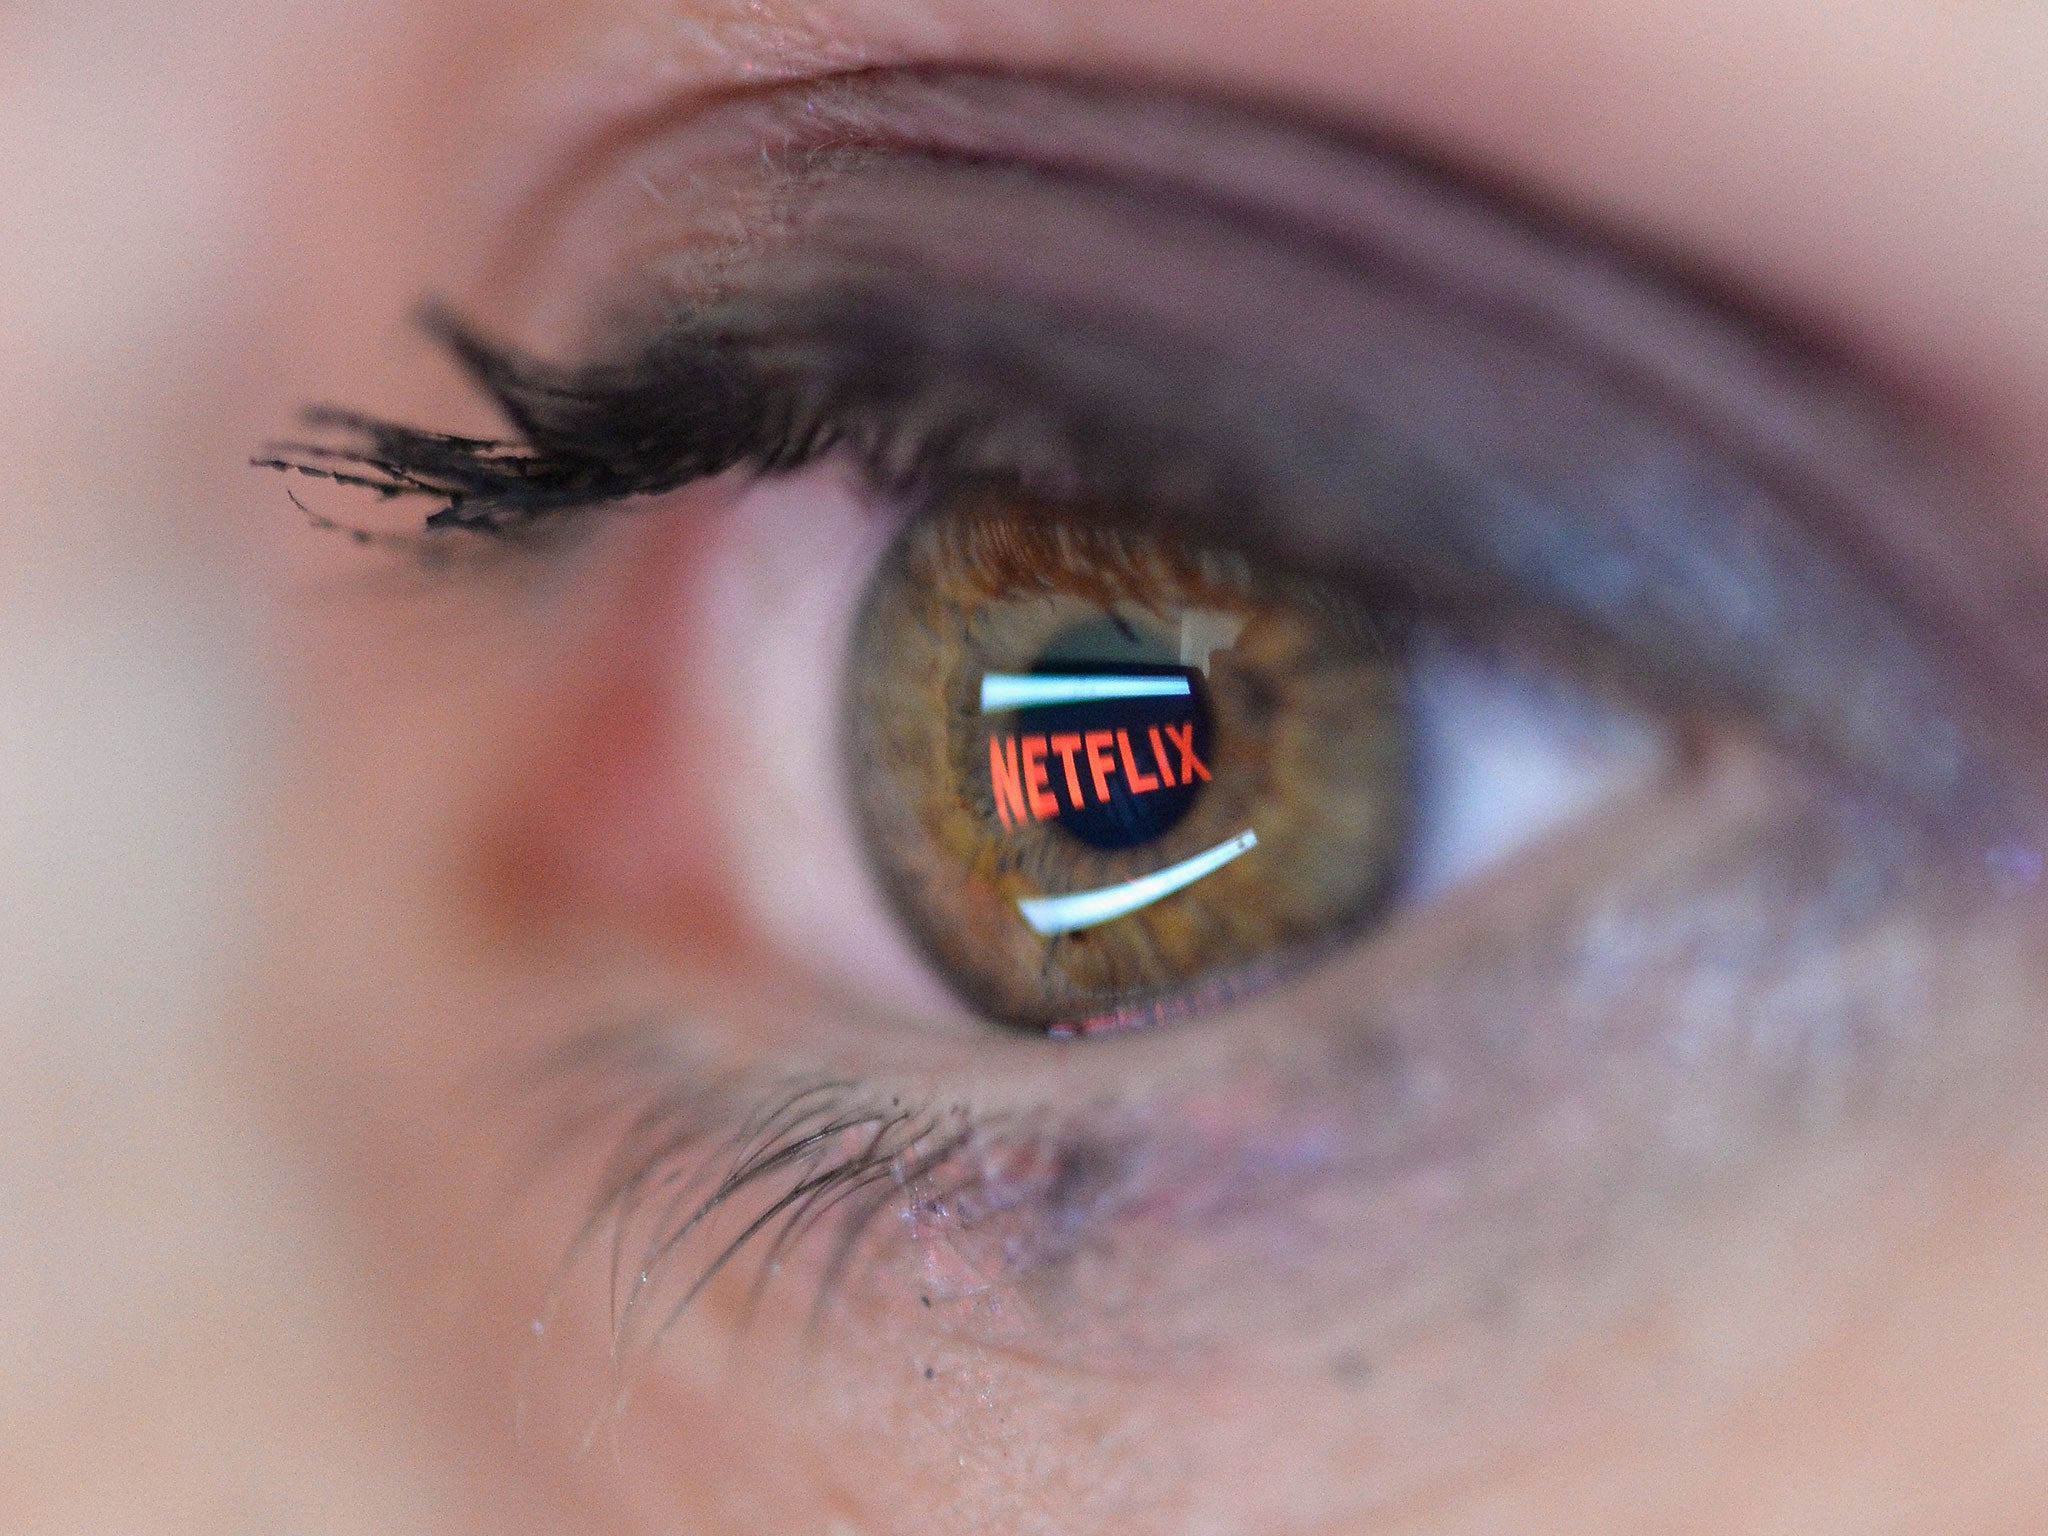 Netflix has apologised for overcharing customers